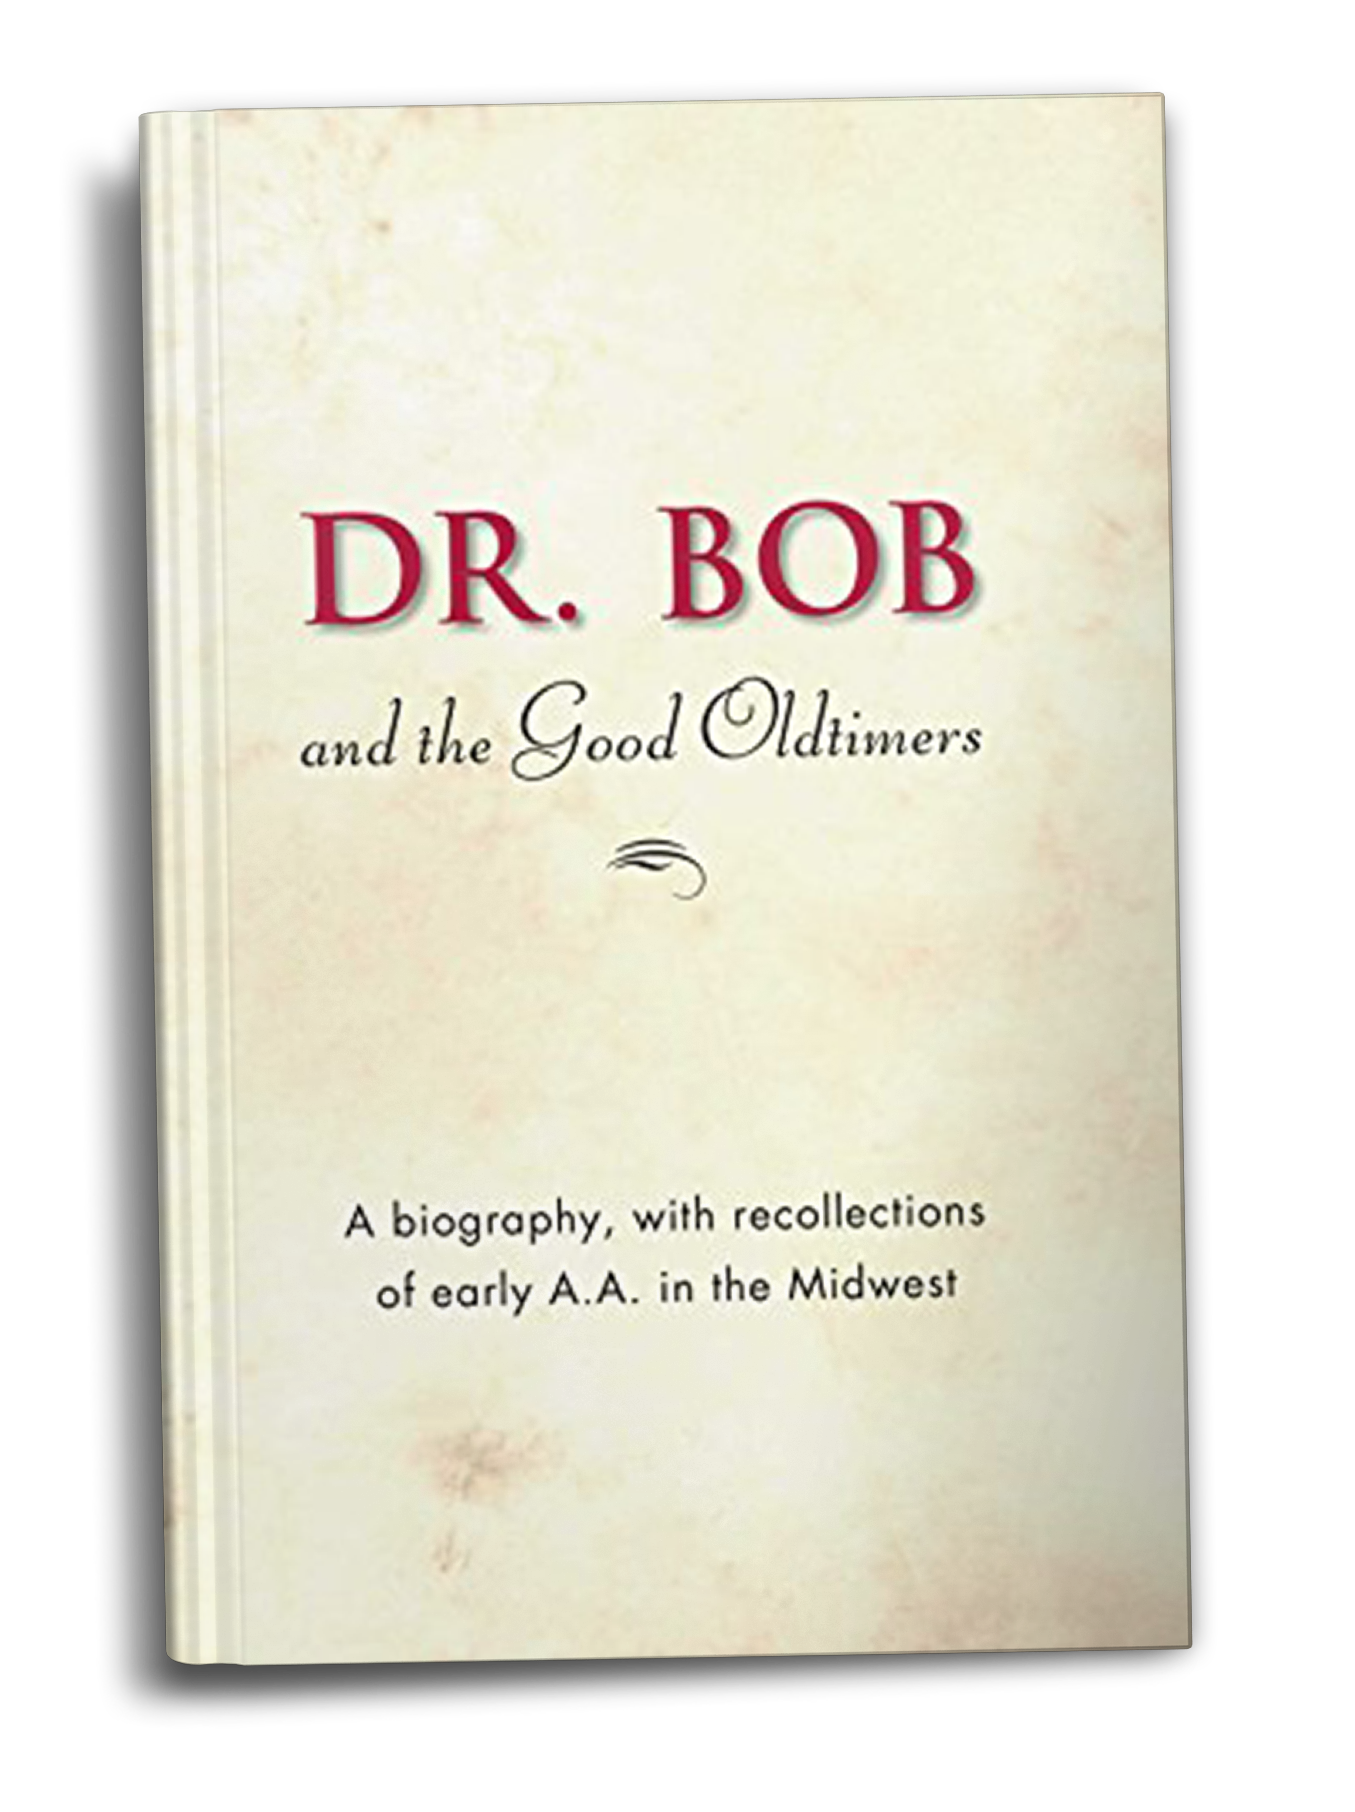 Dr. Bob and the Good Old Timers